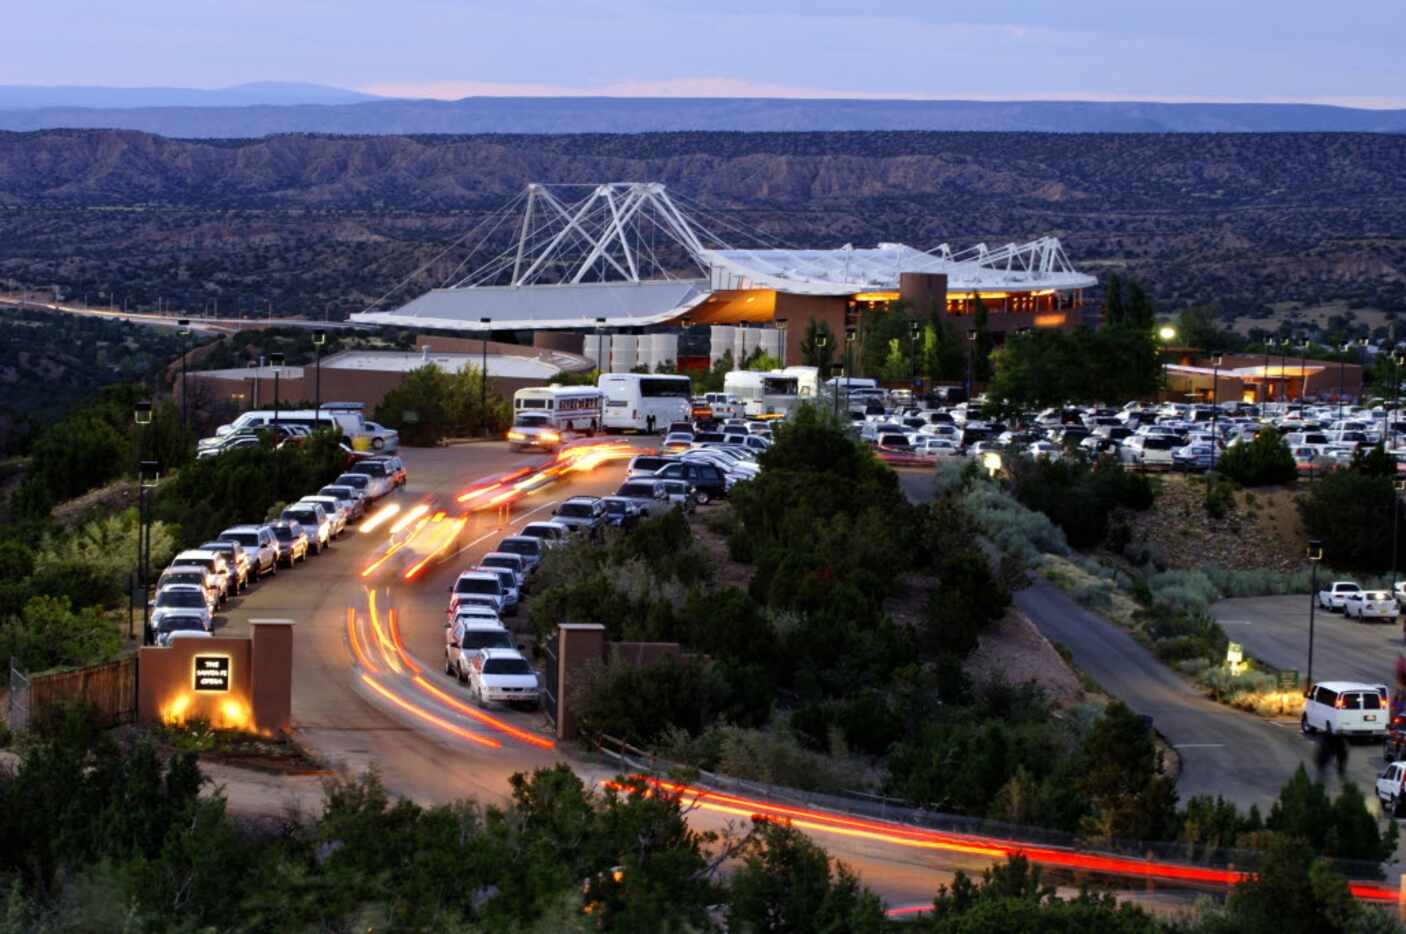 A line of cars heads toward the open-air Santa Fe Opera house, located in the foothills...